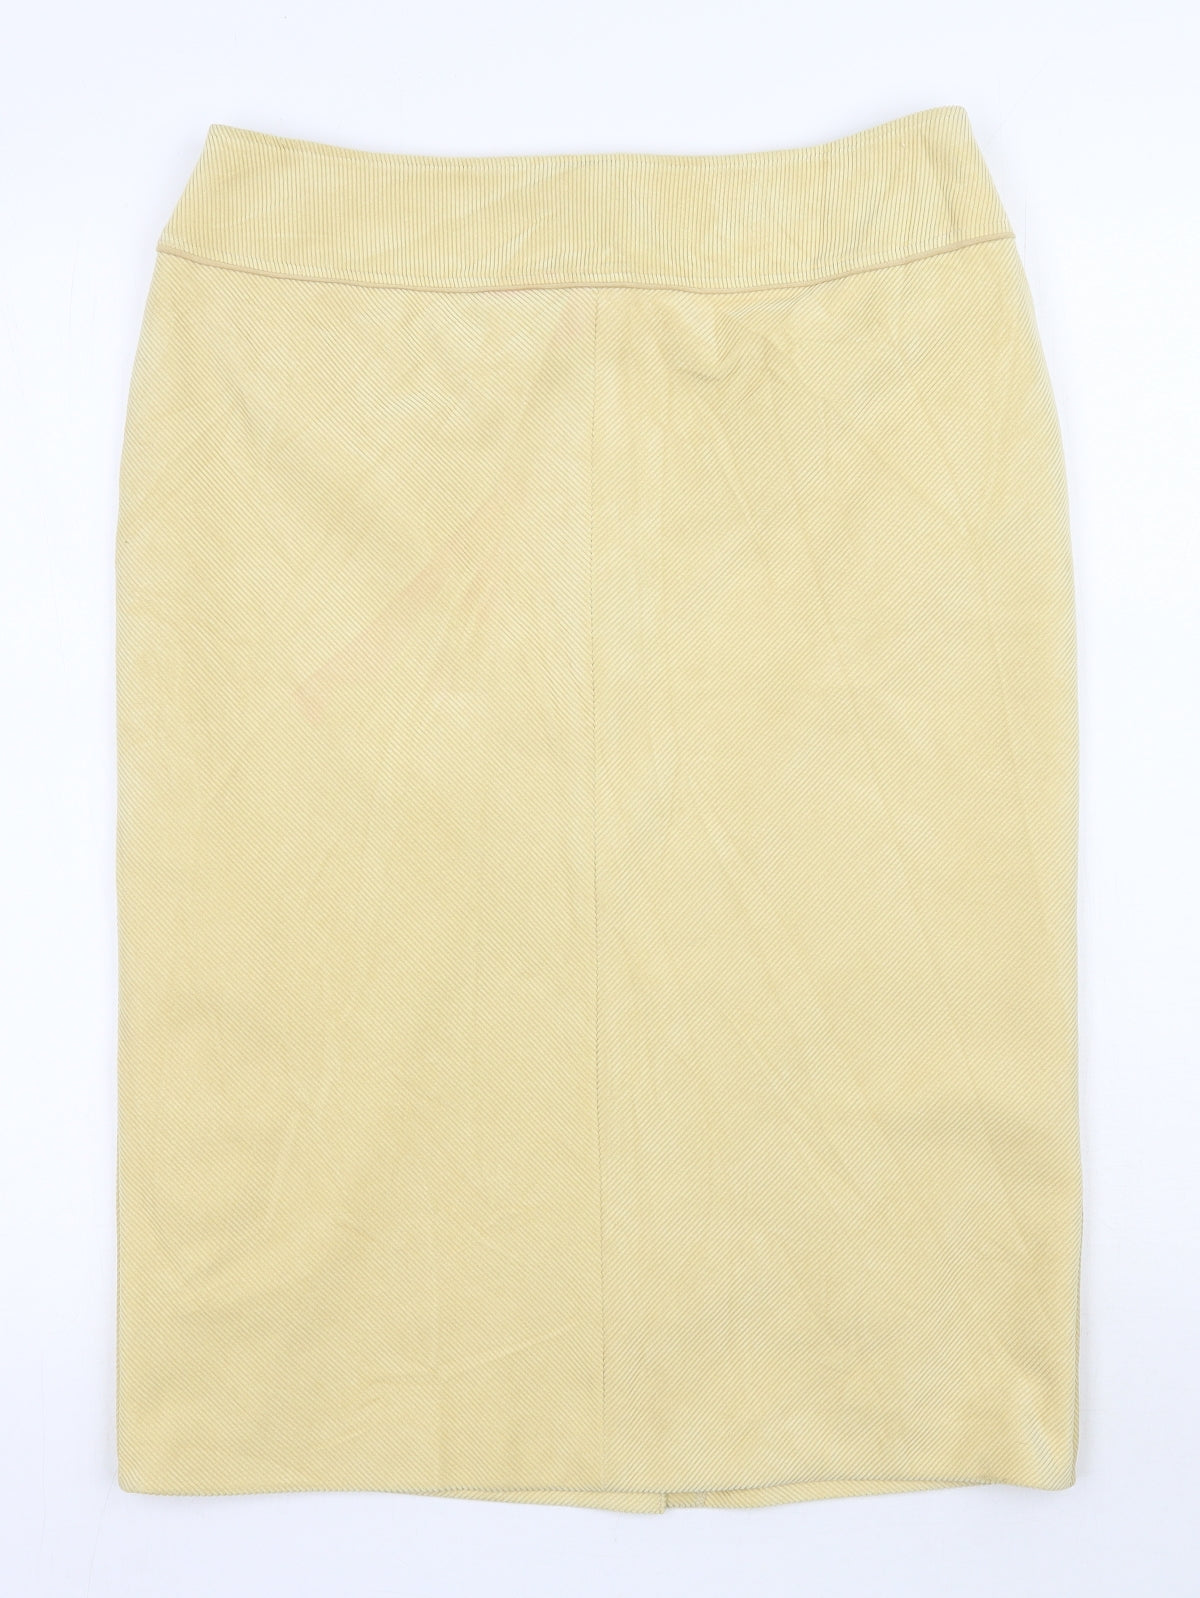 Gelco Womens Yellow  Polyester A-Line Skirt Size 14   Zip